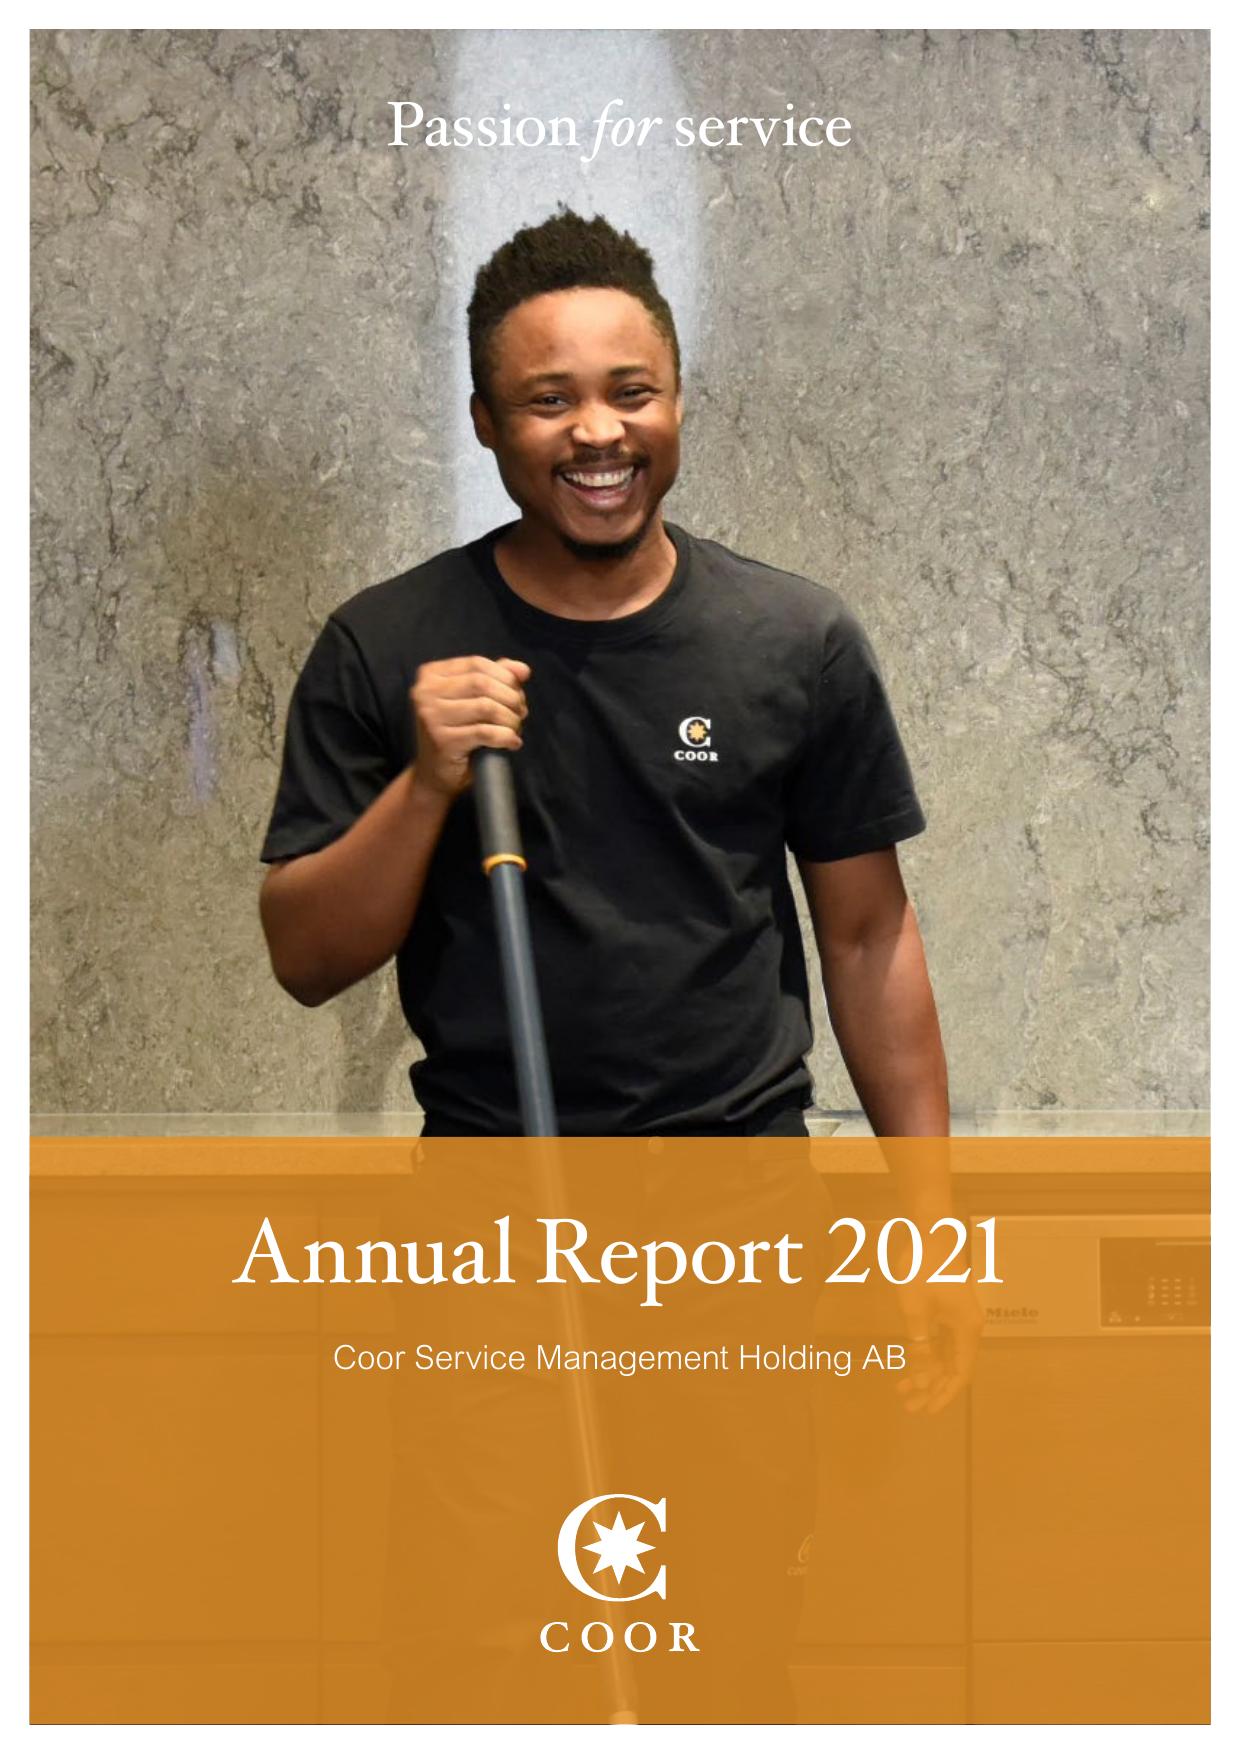 MCMORROWREPORTS 2021 Annual Report